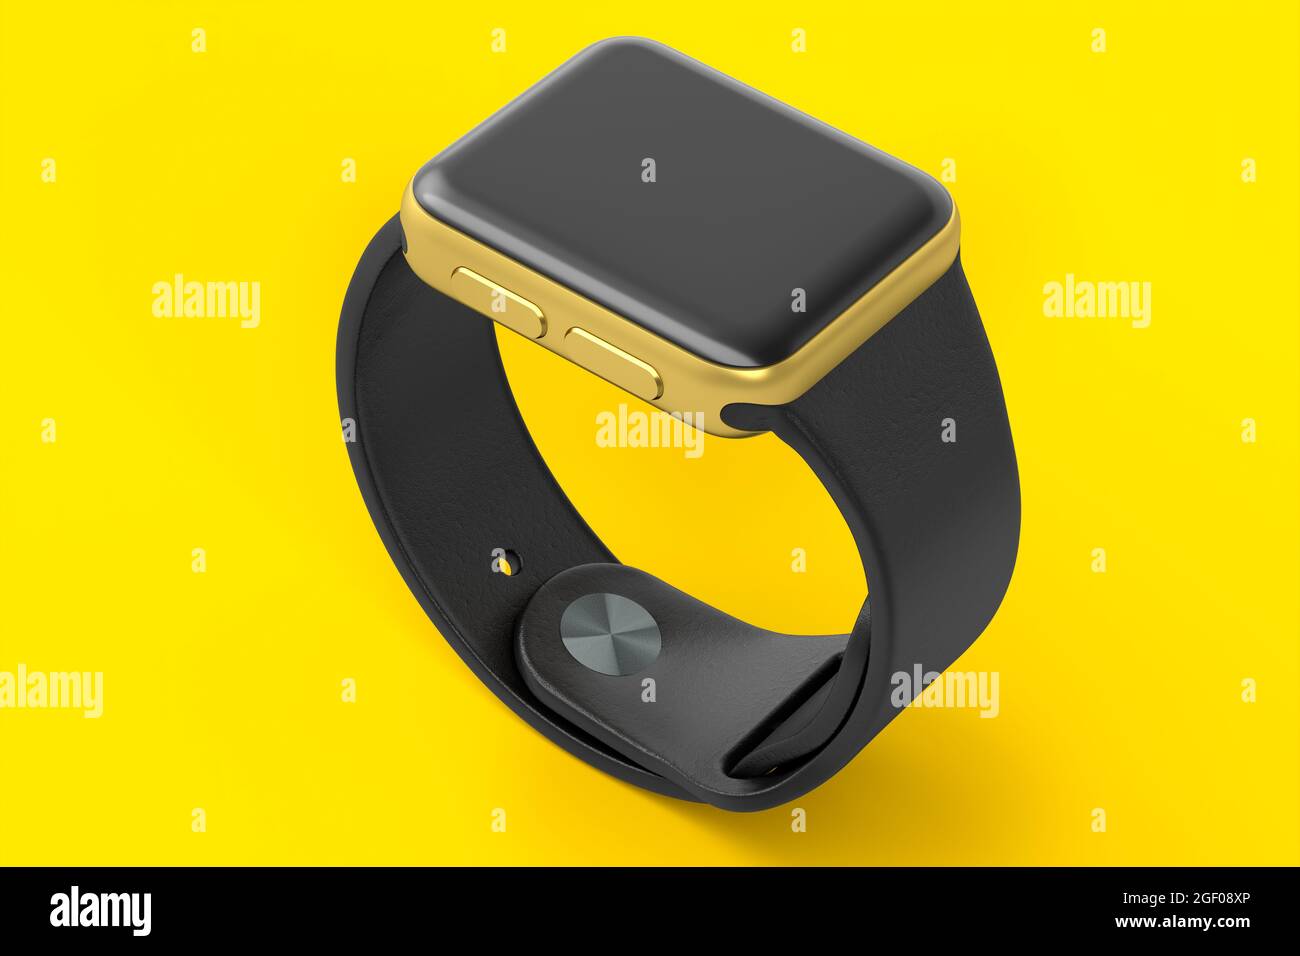 Stainless gold smart watch with black strap isolated on yellow background.  3D rendering concept of wearable device health and fitness tracker Stock  Photo - Alamy